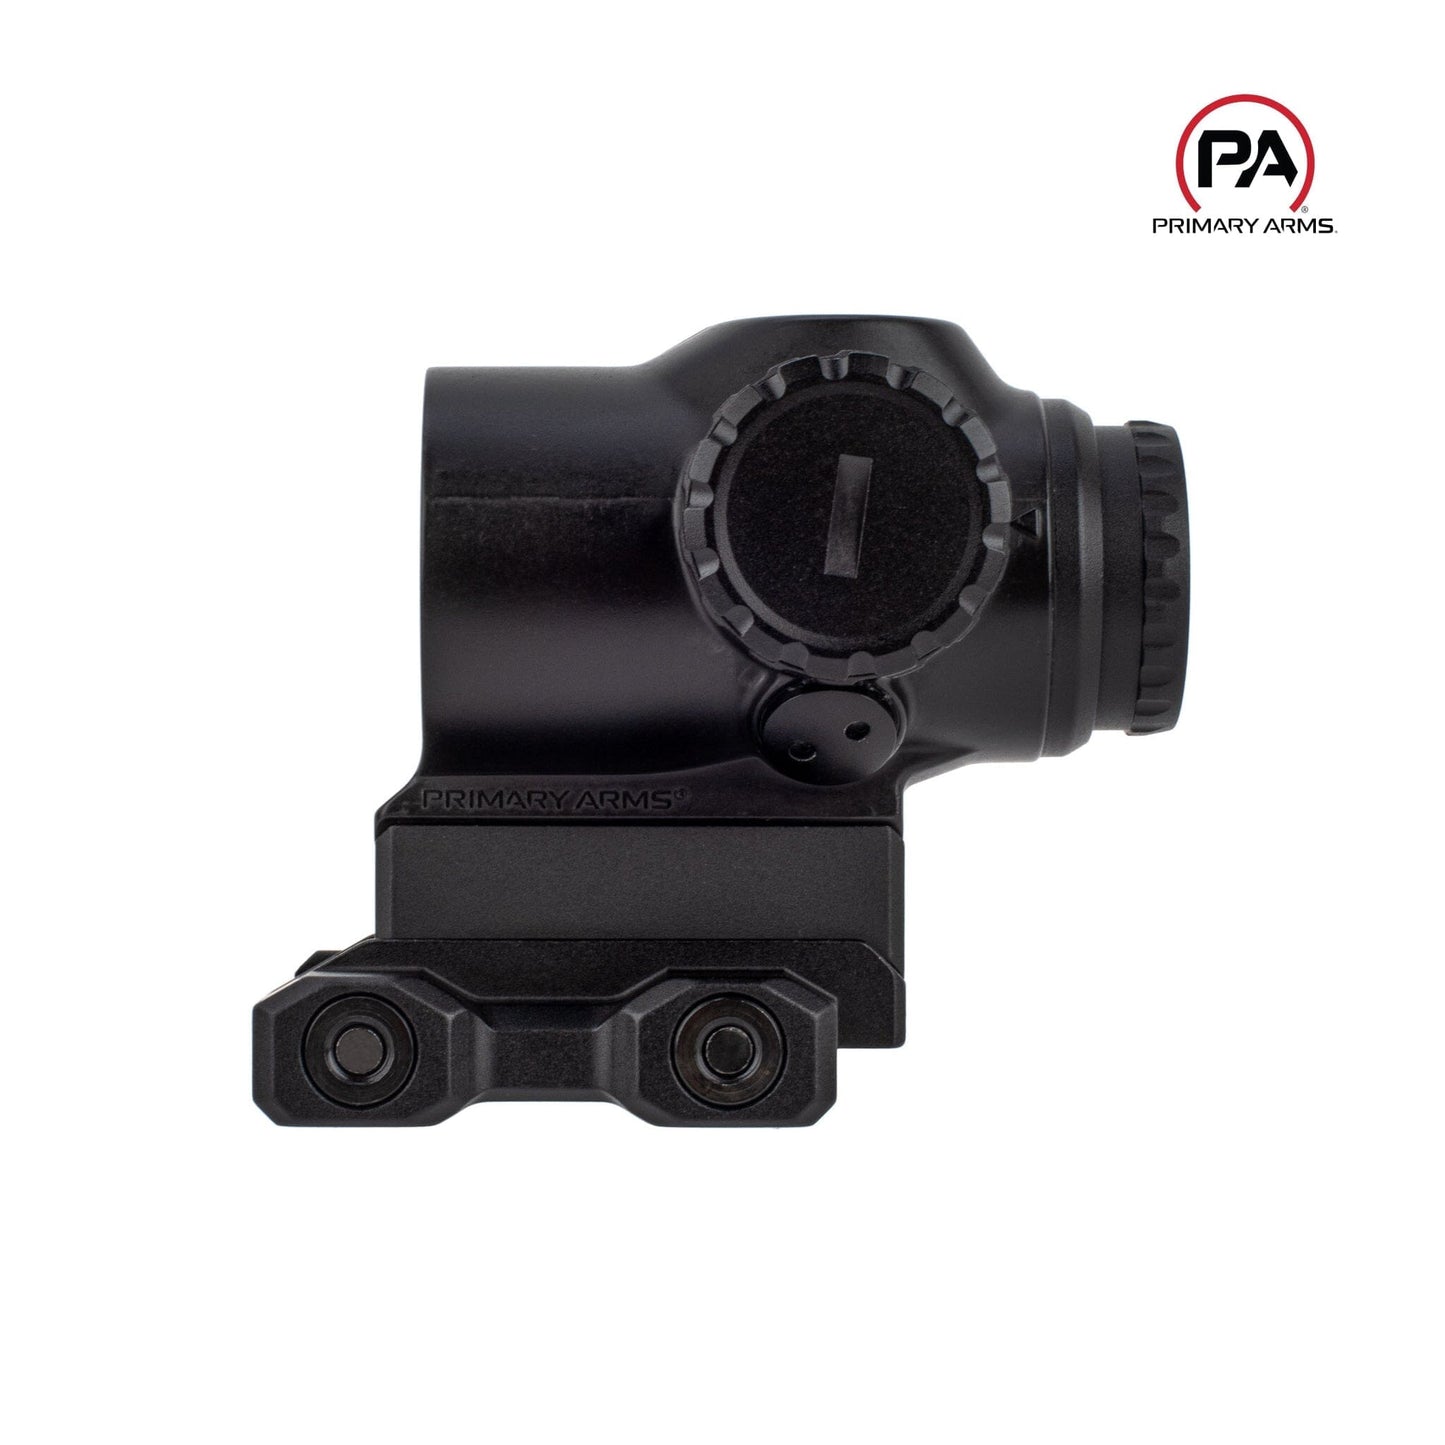 Primary Arms SLx 1X MicroPrism Scope - Red ACSS Gemini 9mm Reticle Prism Rifle Scope Primary Arms 